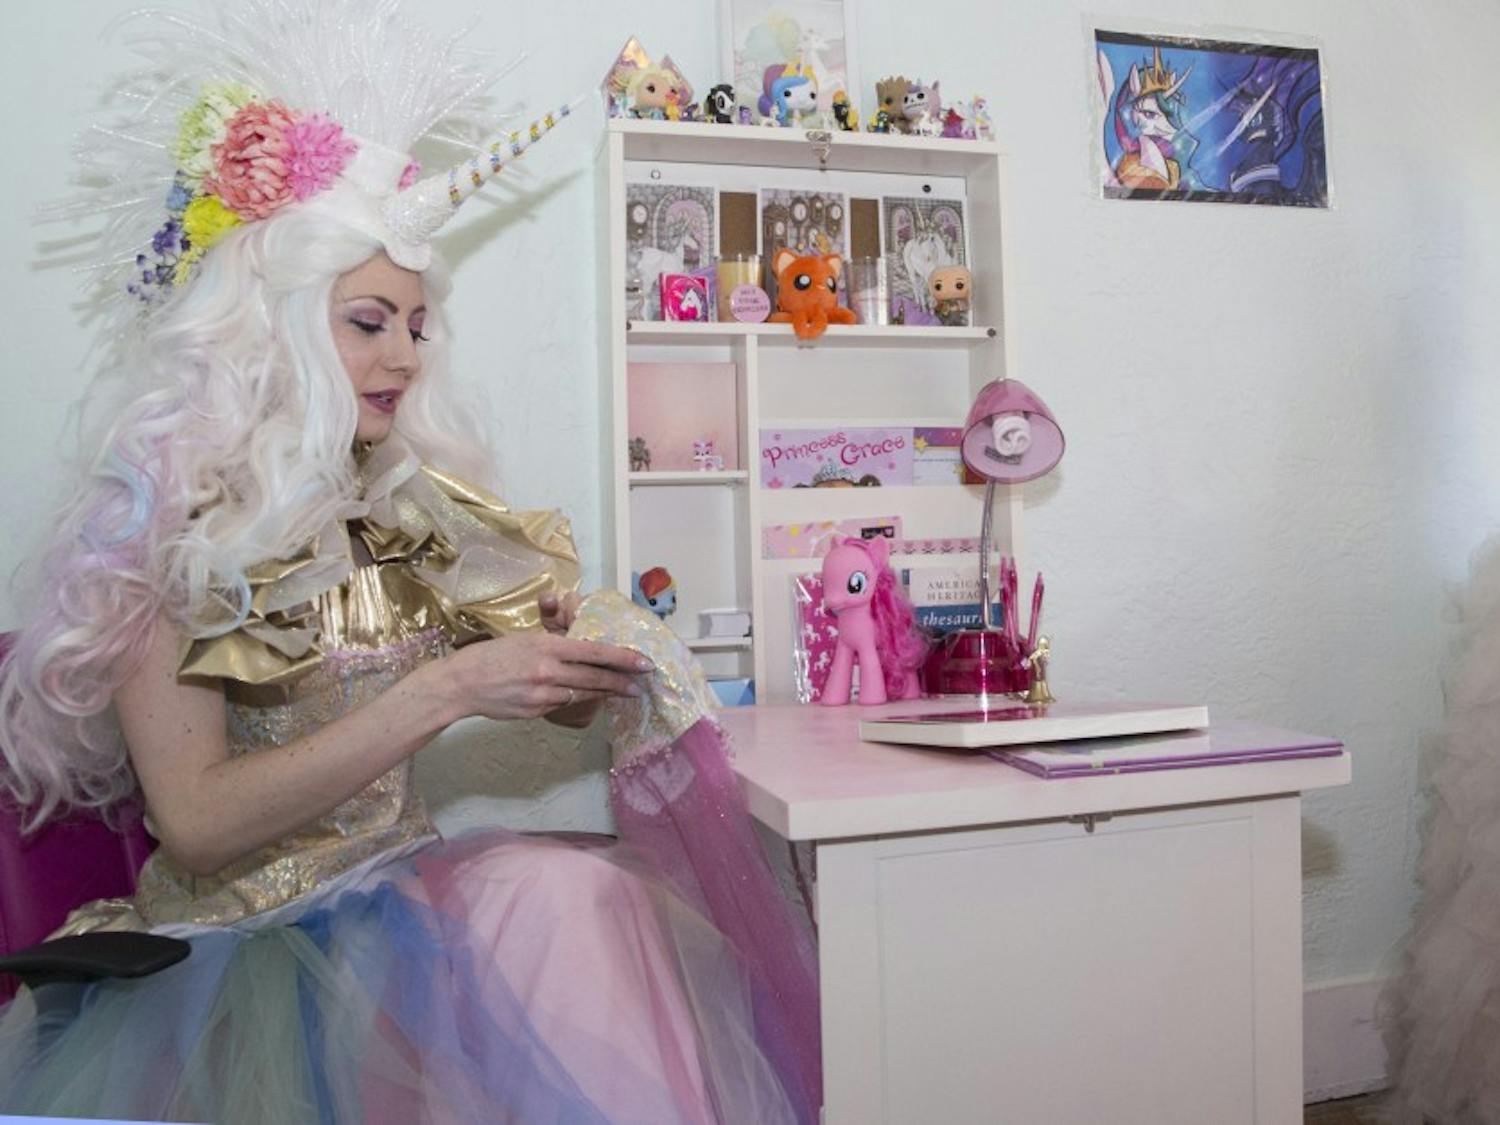 Journalism alumna Paula Bauman suits up as Princess Unicorn in her home office Monday afternoon. Princess Unicorn is a persona that Bauman puts on to "inspire and empower" children of all ages during birthday parties and other events.